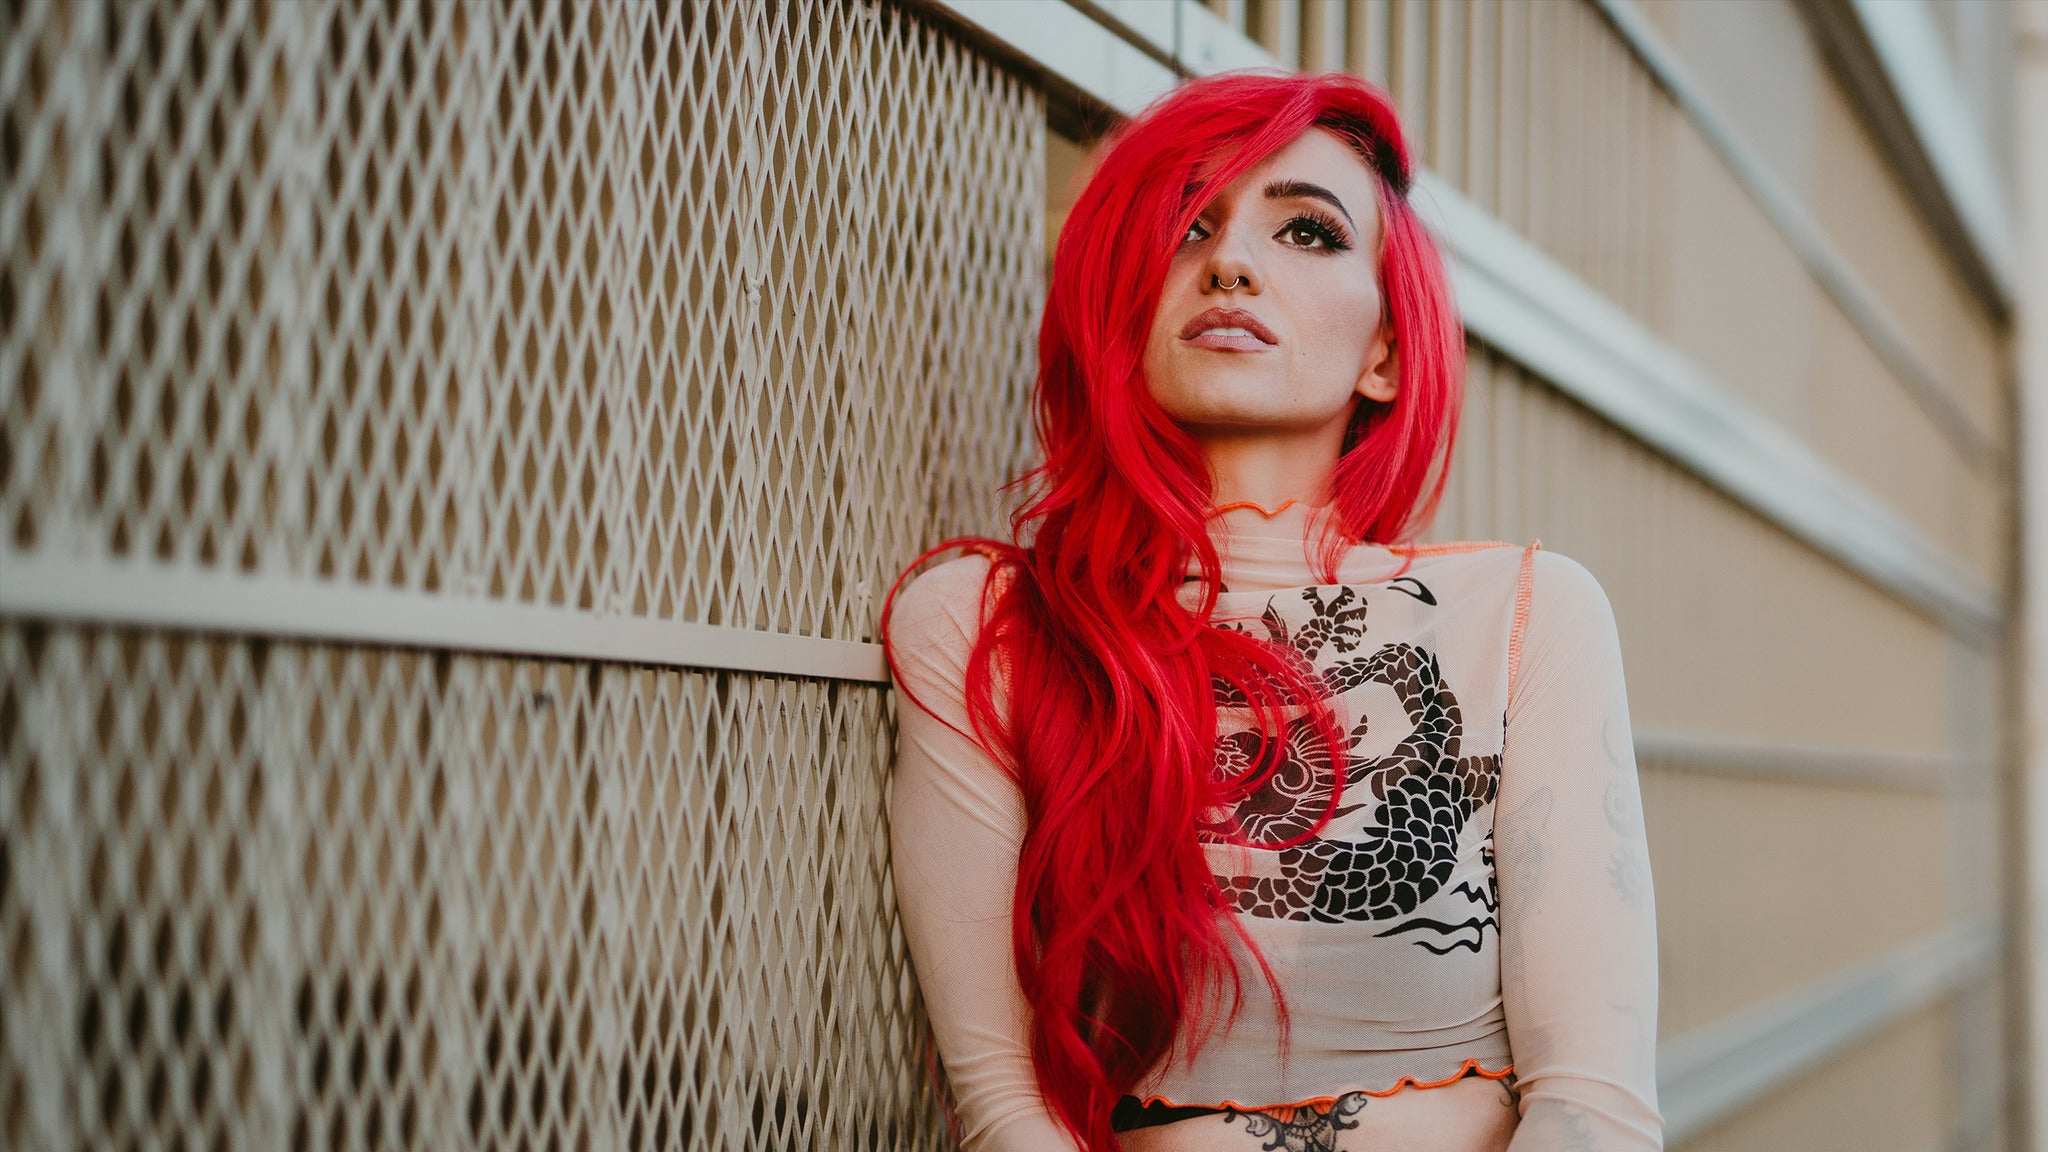 Lights - We Were Here Tour in Toronto promo photo for Front Of The Line by American Express presale offer code